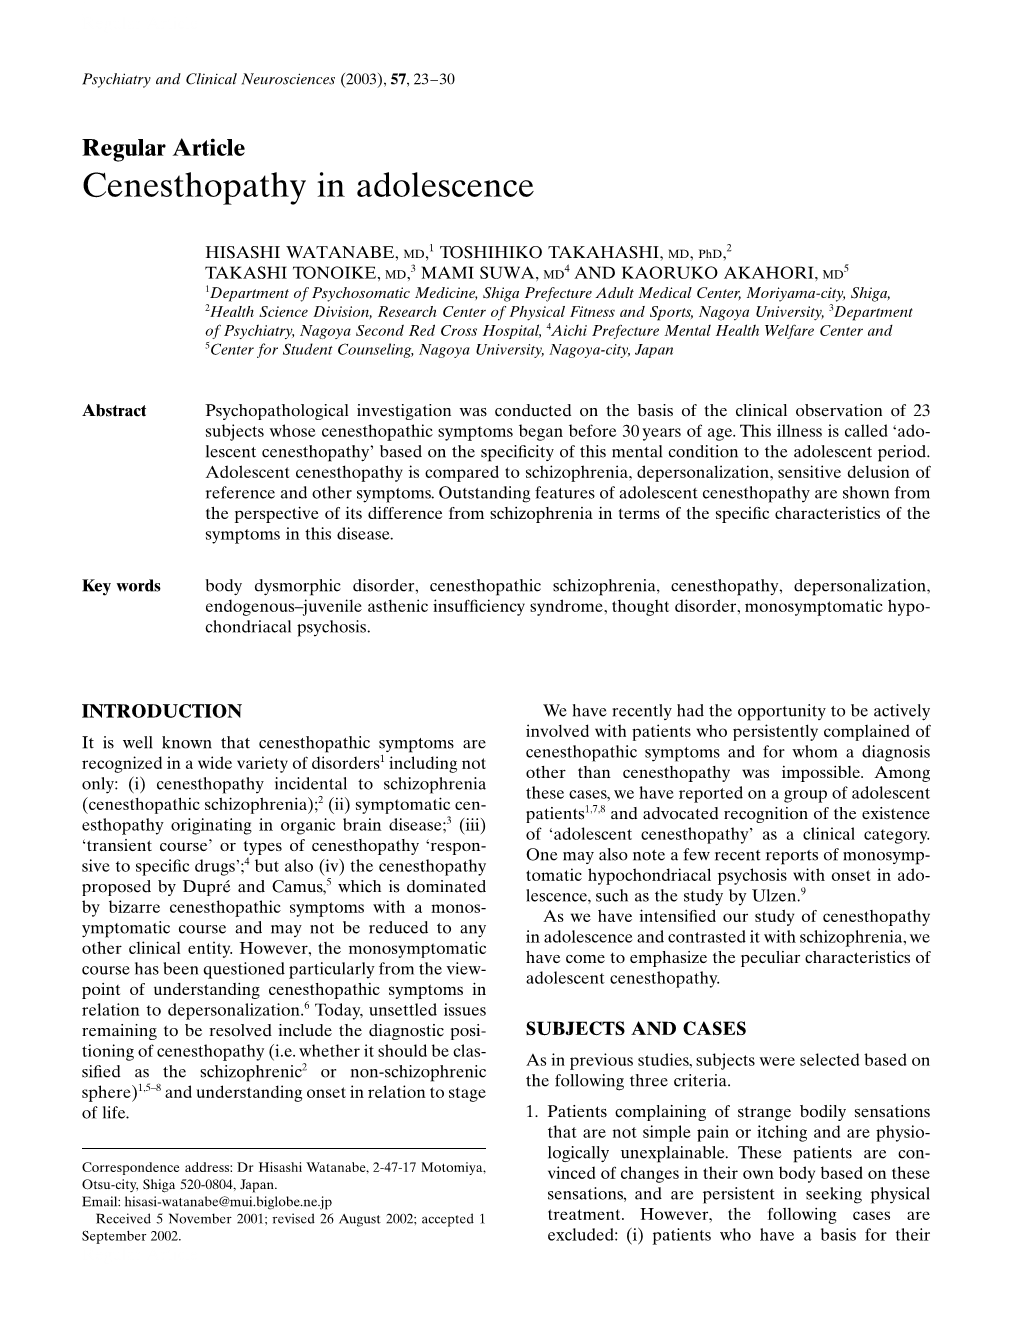 Cenesthopathy in Adolescence H